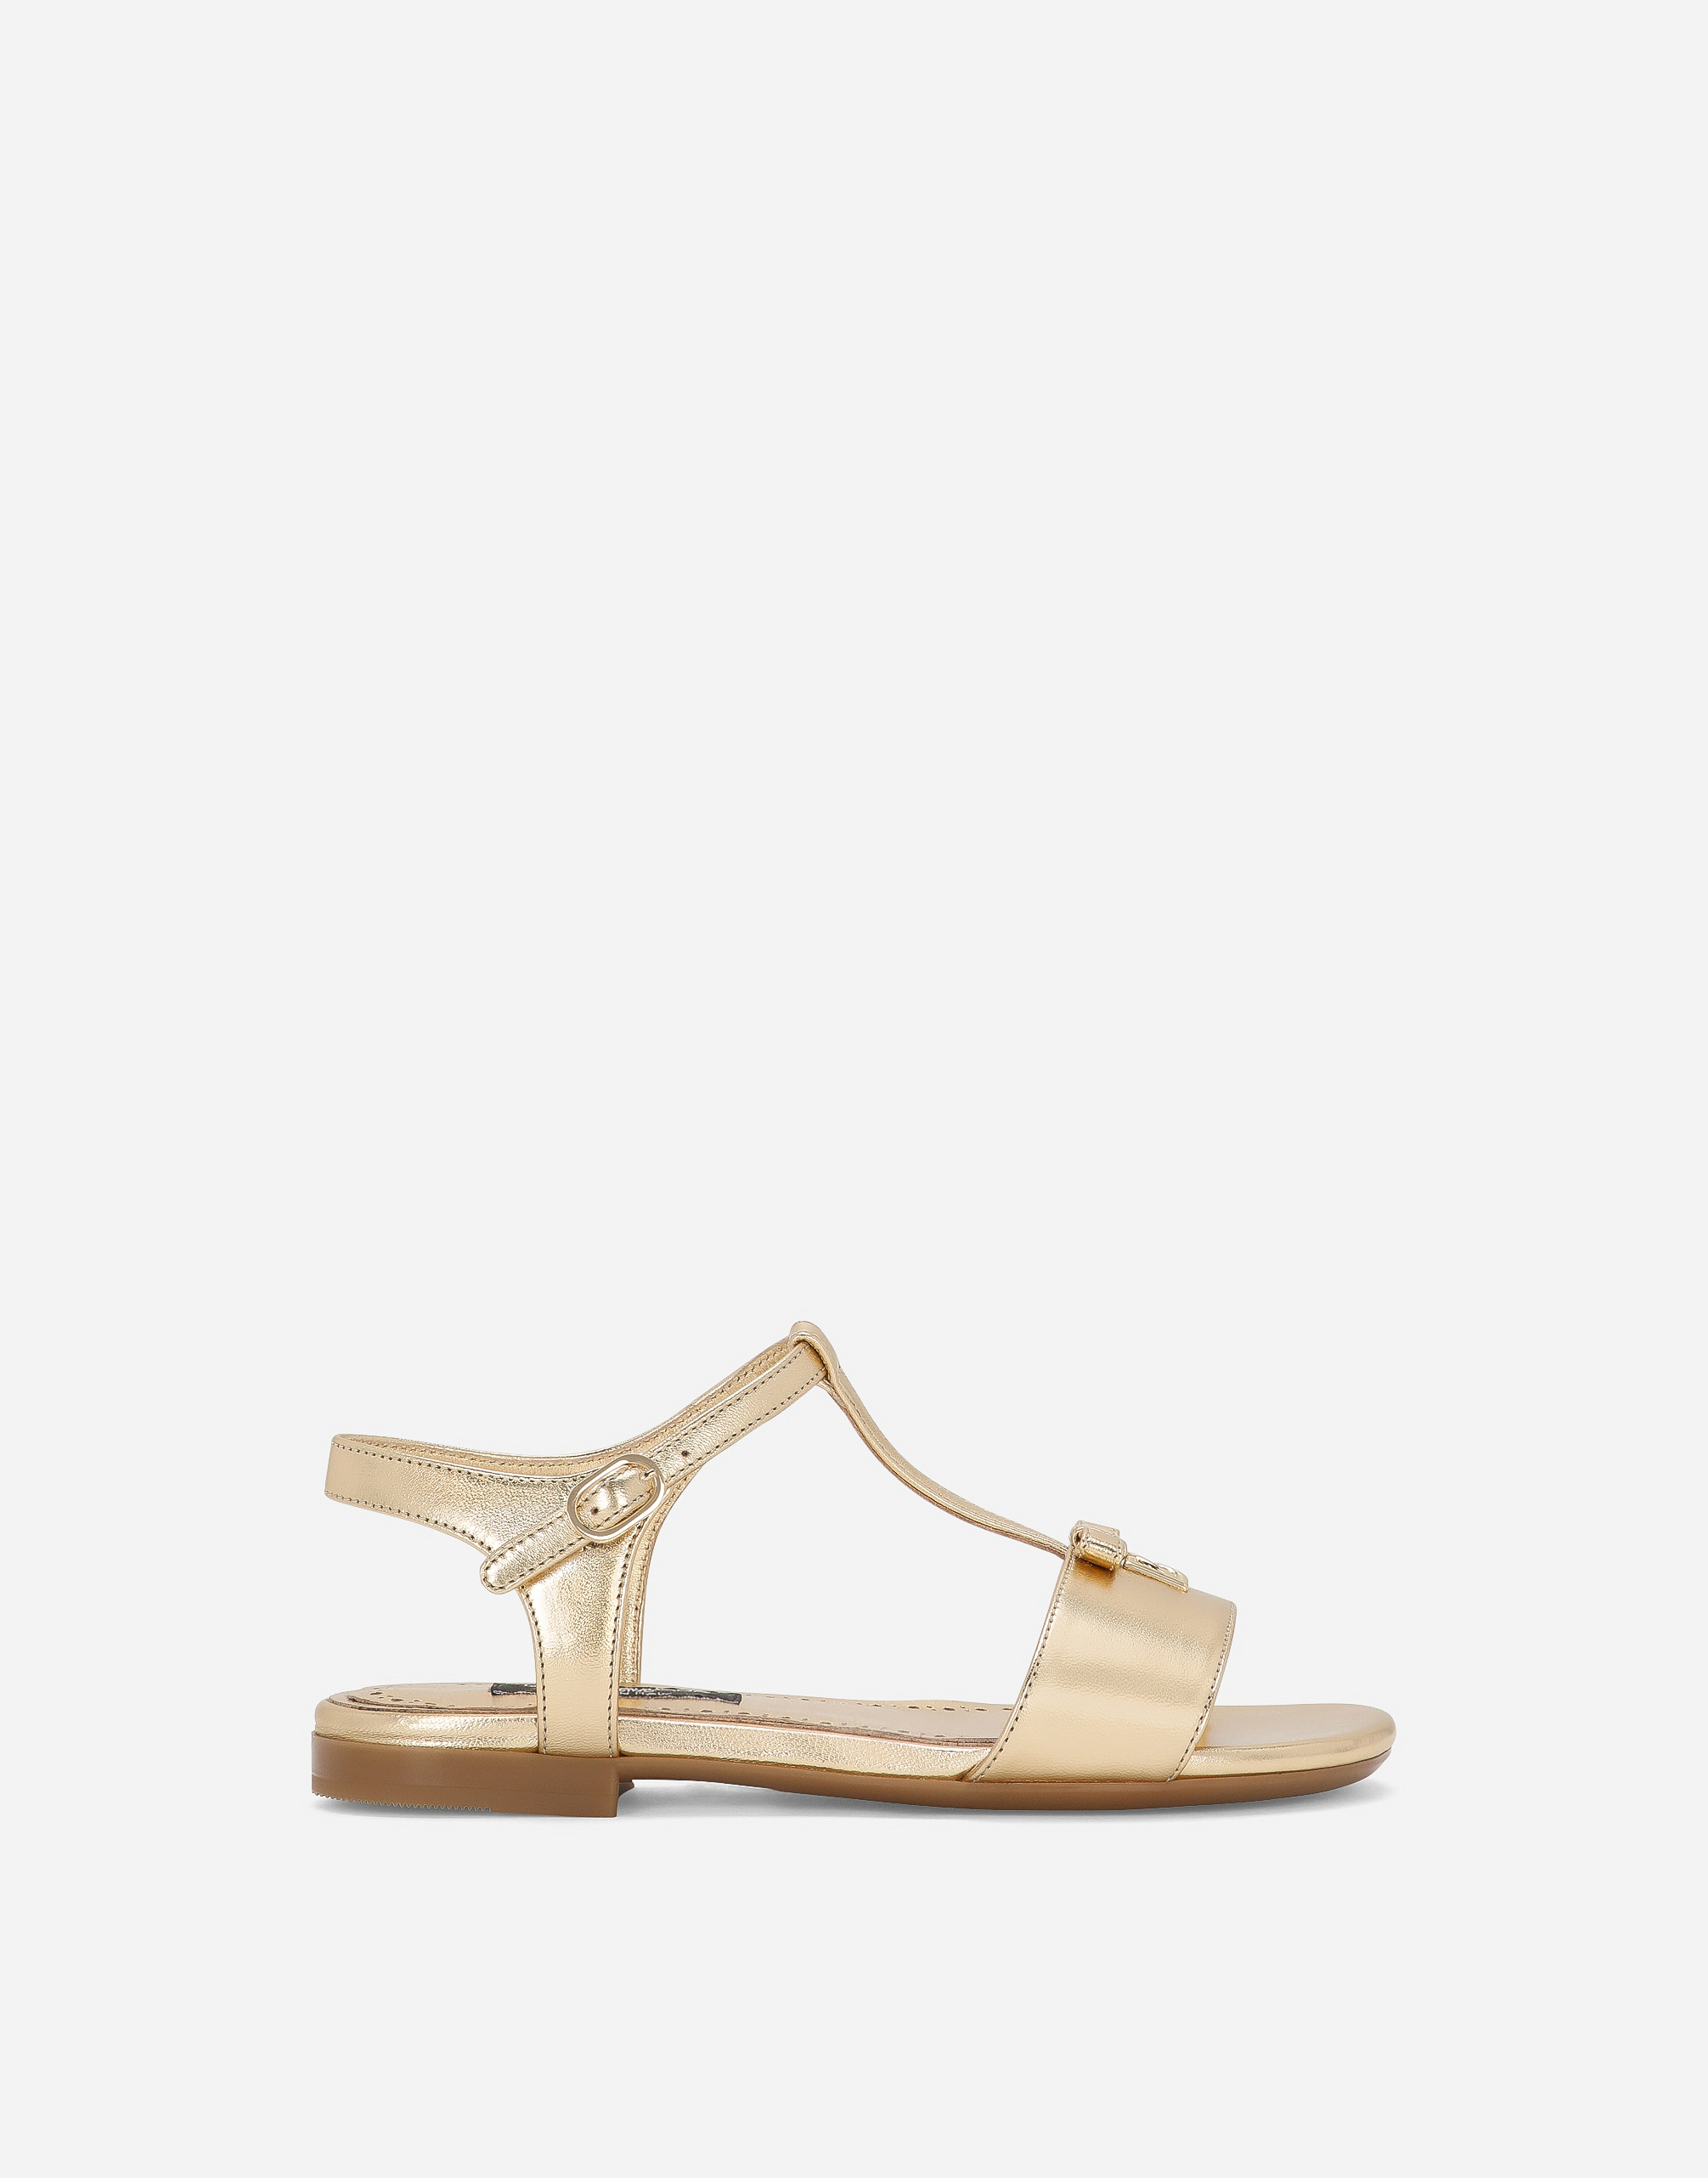 Dolce & Gabbana Foiled Leather Sandals In Gold